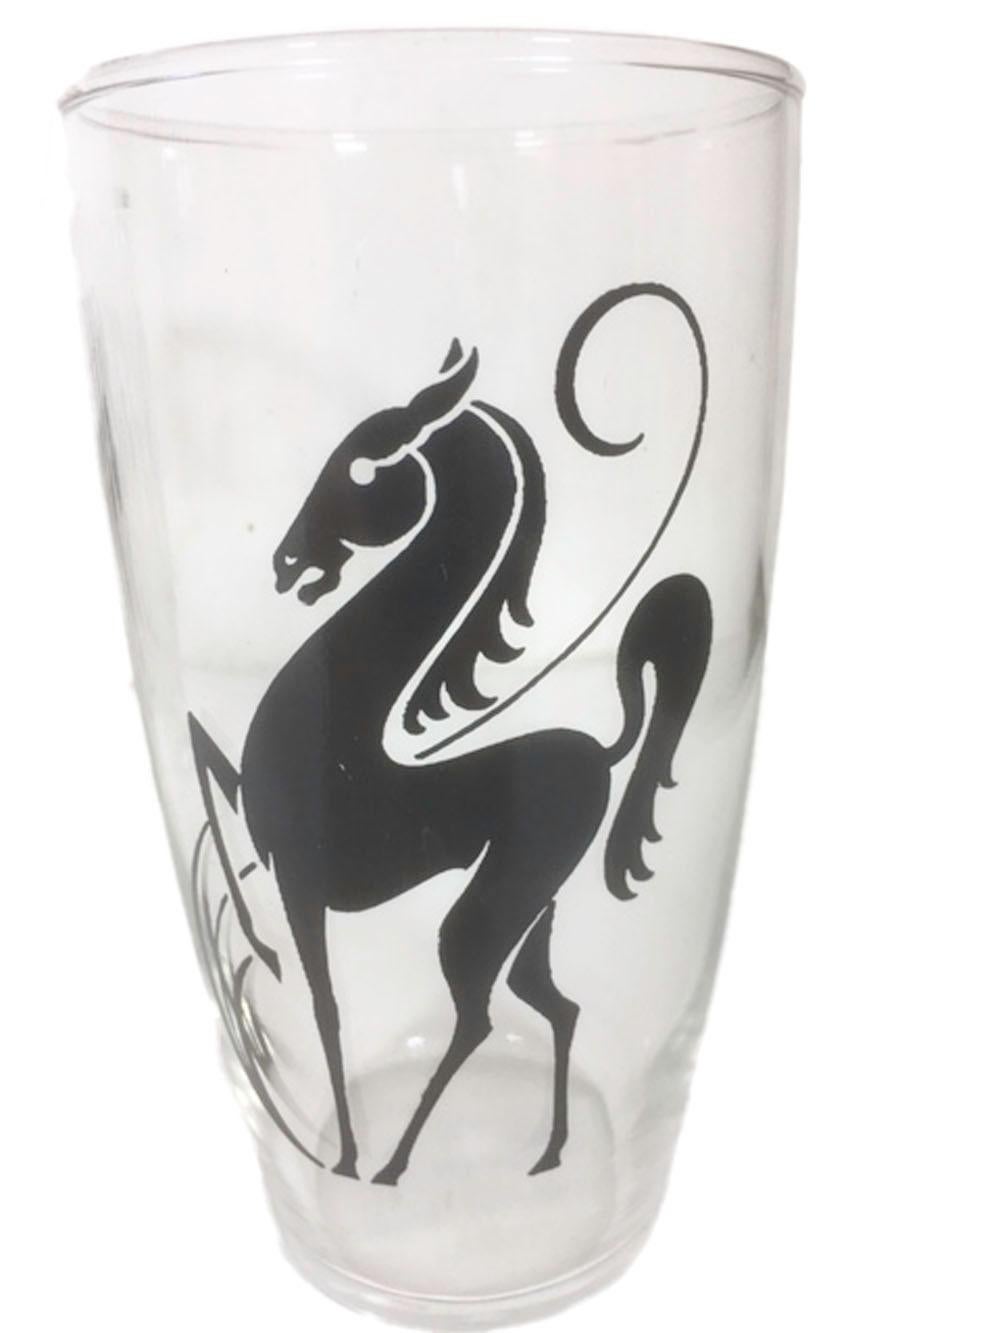 Set of 8 vintage tumblers, decorated in black enamel with an image of a stylized prancing horse on clear glass.